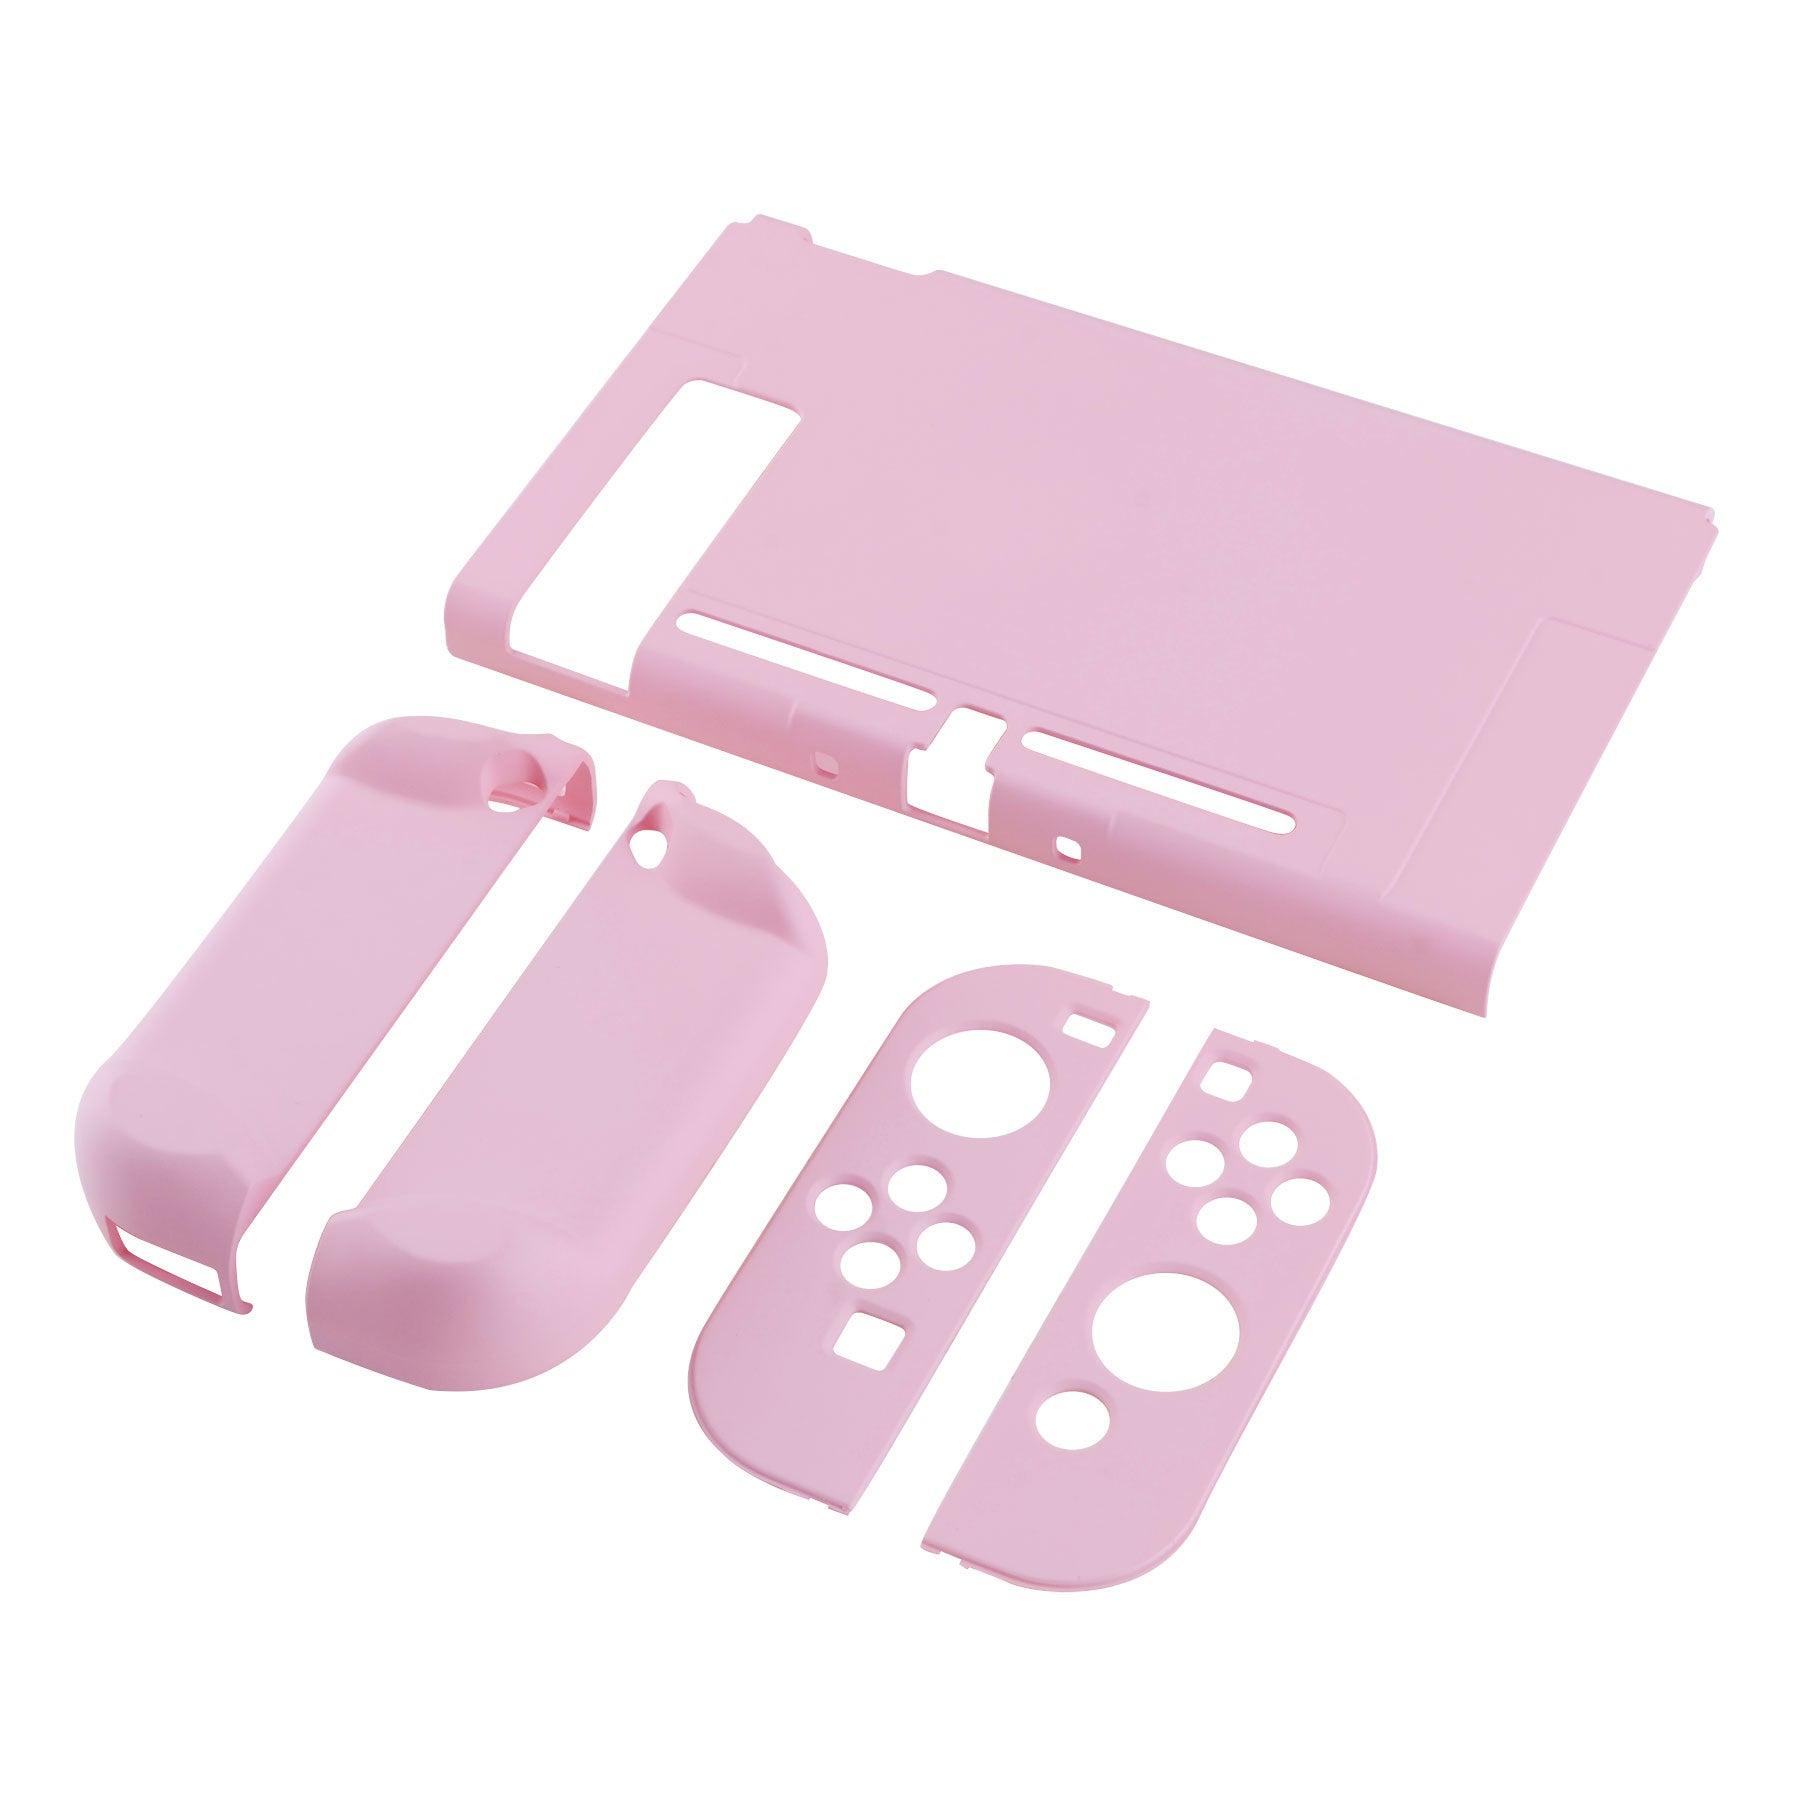 PlayVital Cherry Blossoms Pink Back Cover for Nintendo Switch Console, NS Joycon Handheld Controller Separable Protector Hard Shell, Soft Touch Customized Dockable Protective Case for Nintendo Switch - NTP312 PlayVital